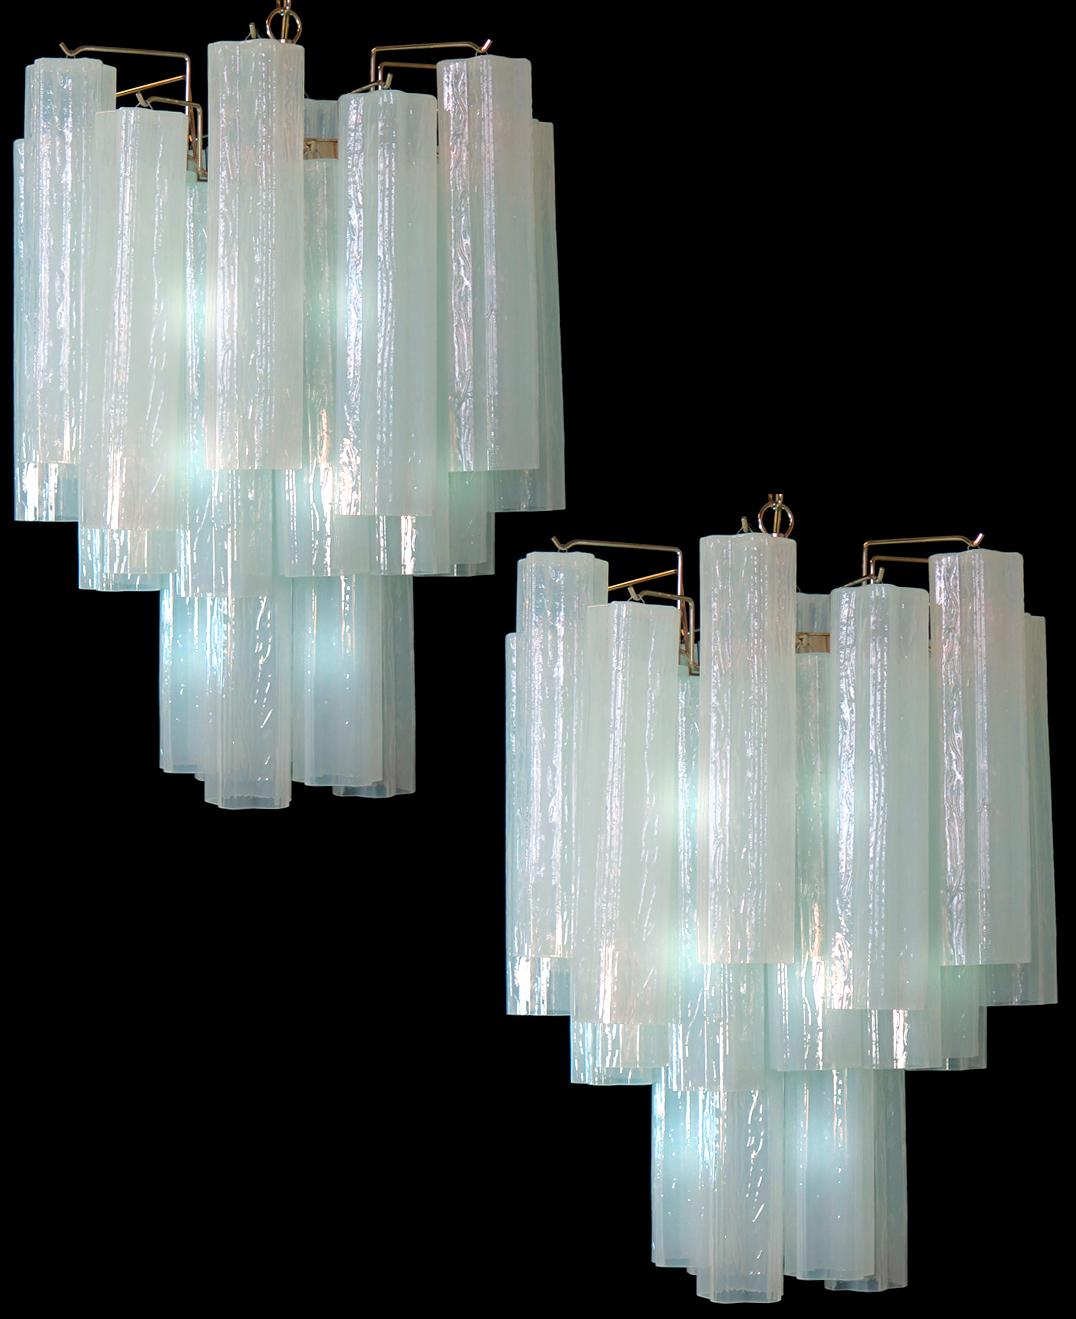 Pair of 30 Tronchi Chandeliers in Toni Zuccheri Style for Venini, Murano For Sale 3